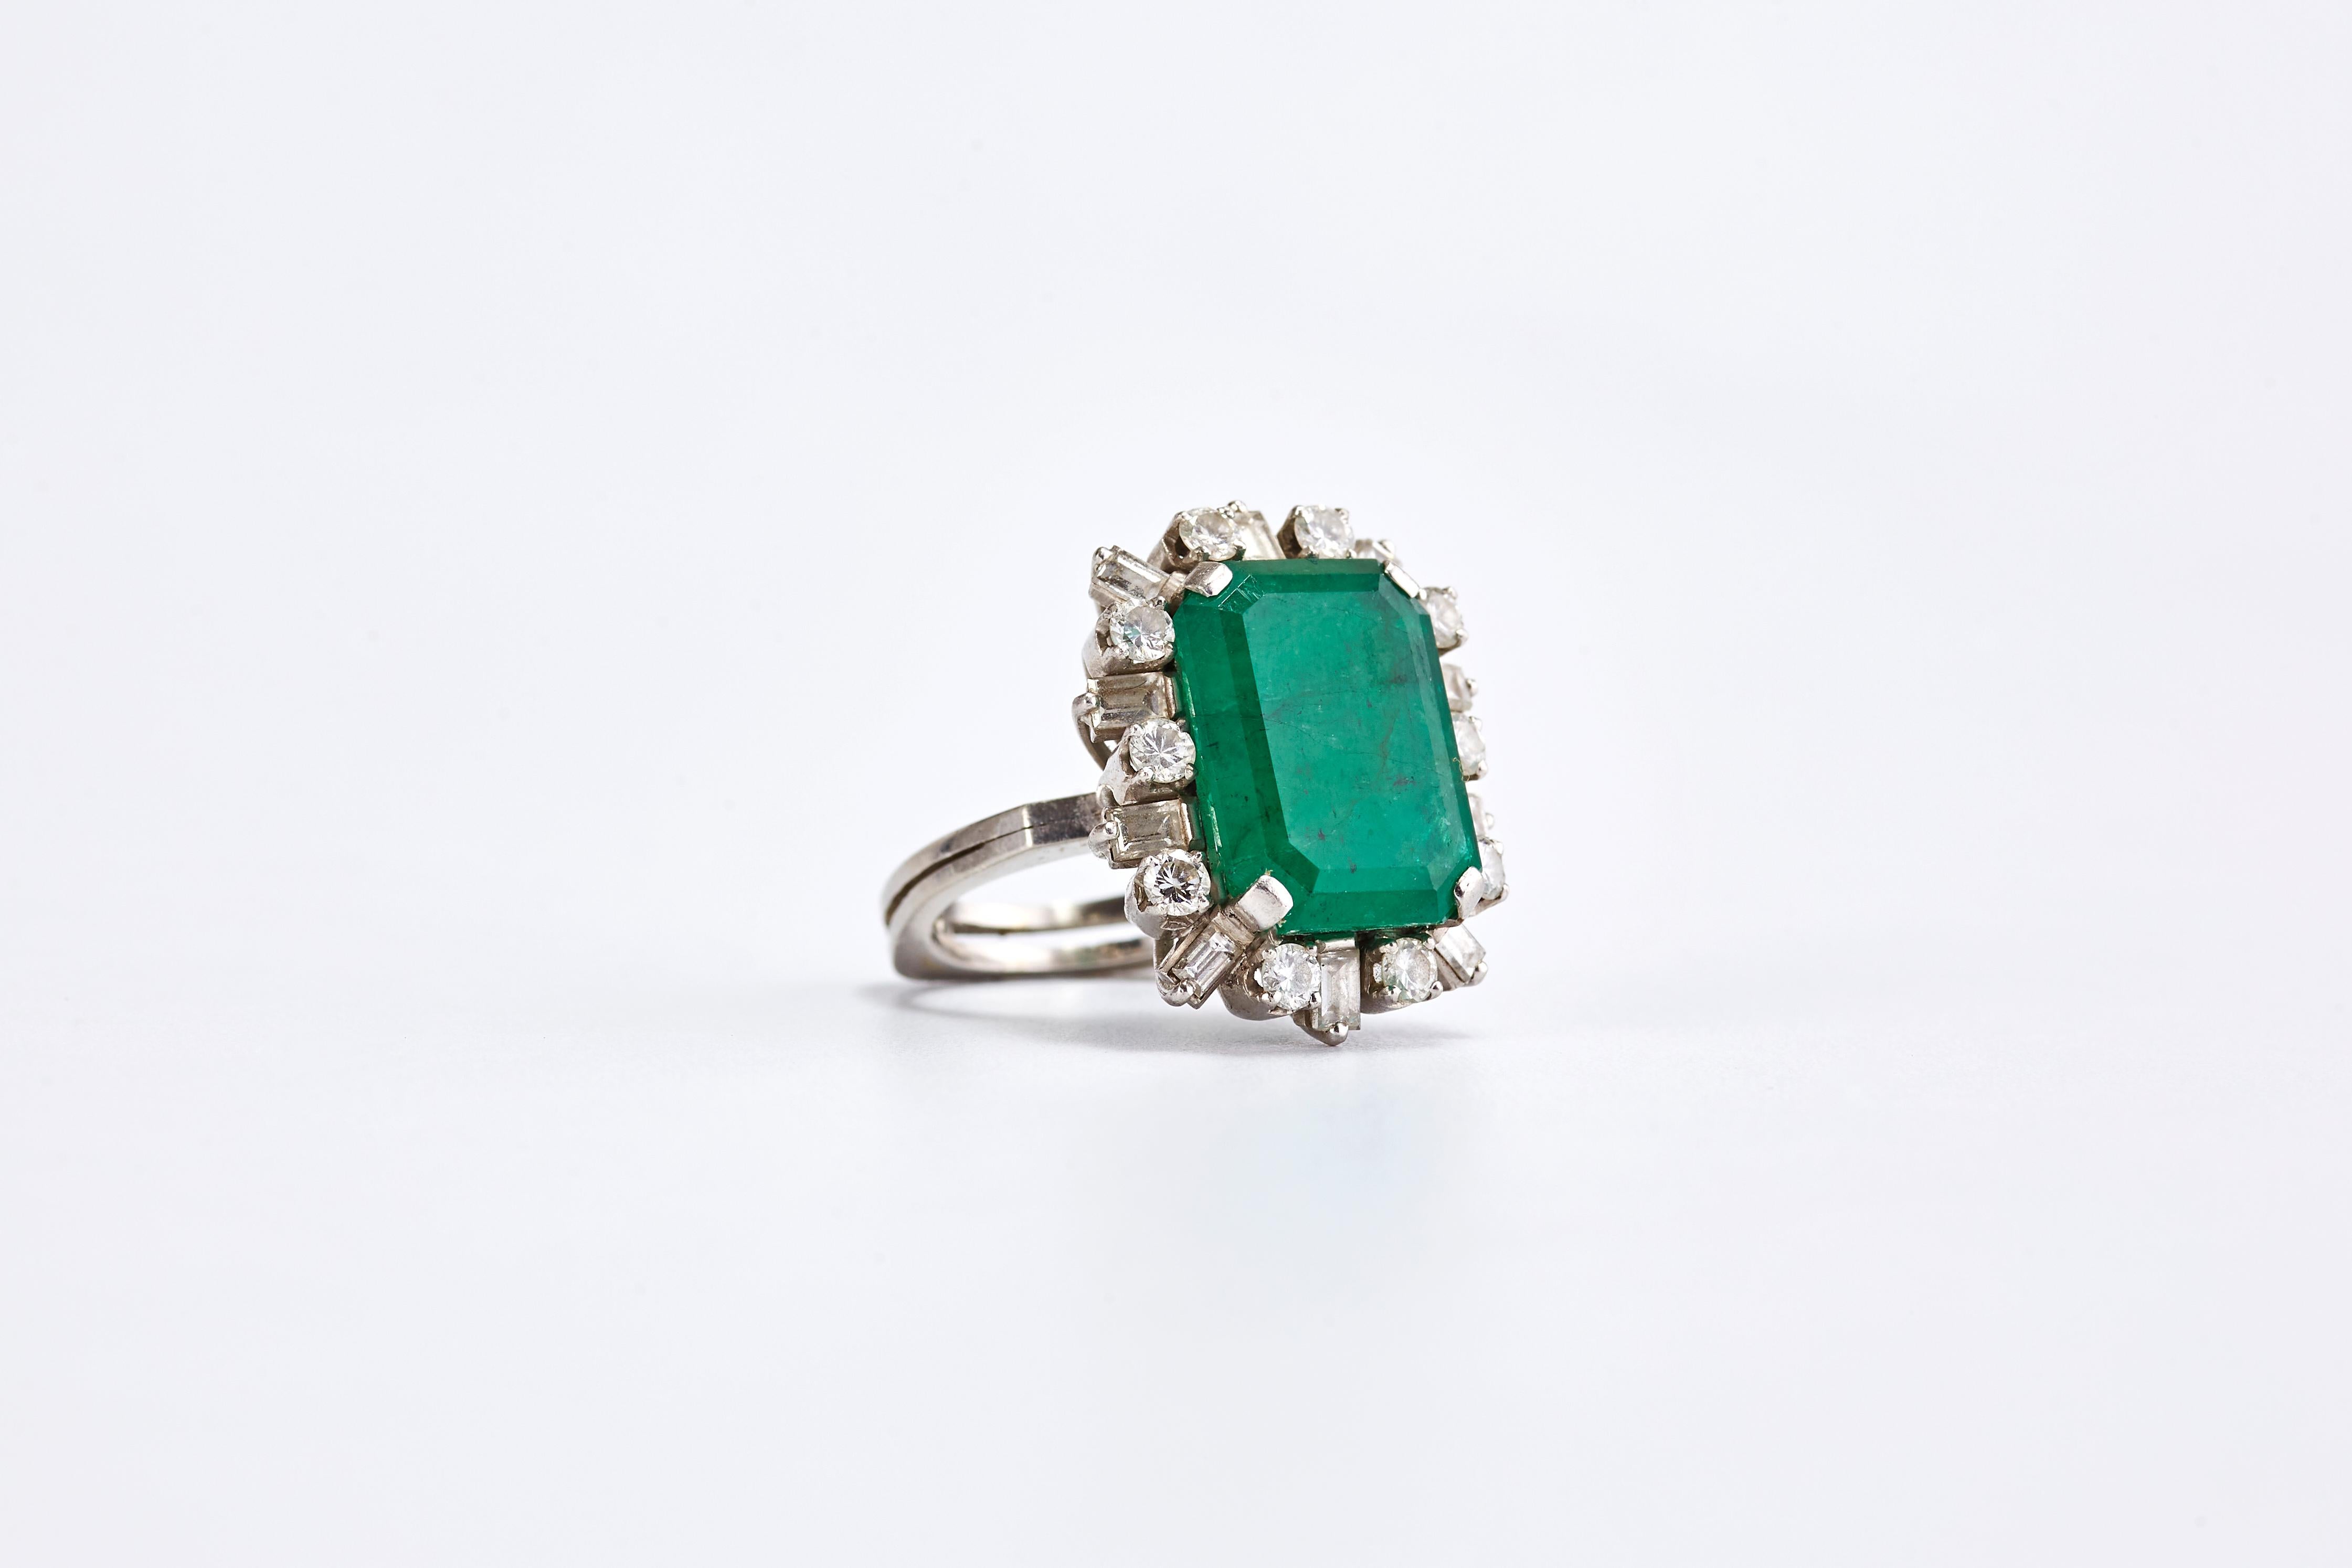 18 Karat White Gold Ring with 8.90 Carat Emerald Stone and Diamonds.
Amazing design of a white gold emerald ring, with an asymmetric halo of diamonds baguette and round cut.
Center Emerald stone weight is 8.90 ct. 
Setted with quality diamonds G VS1